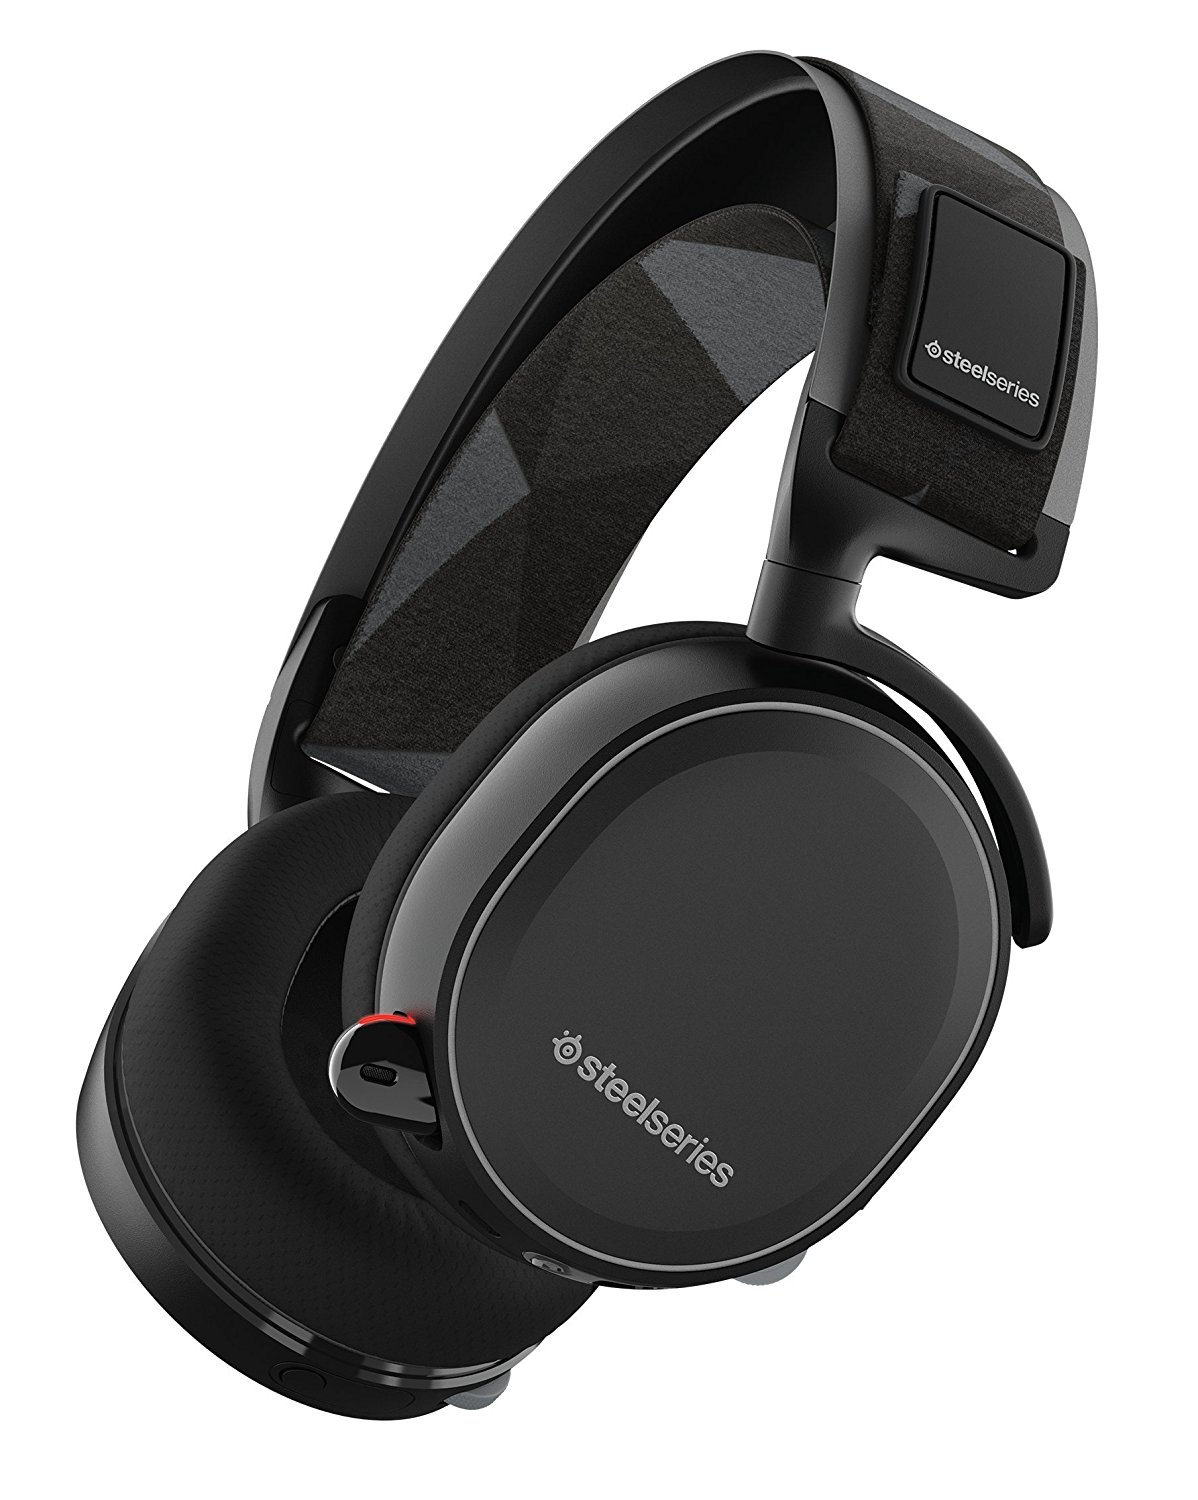 SteelSeries Arctis 7 Lag-Free Wireless Gaming Headset with DTS Headphone:X 7.1 Surround for PC, PlayStation 4, VR, and Mac - Black